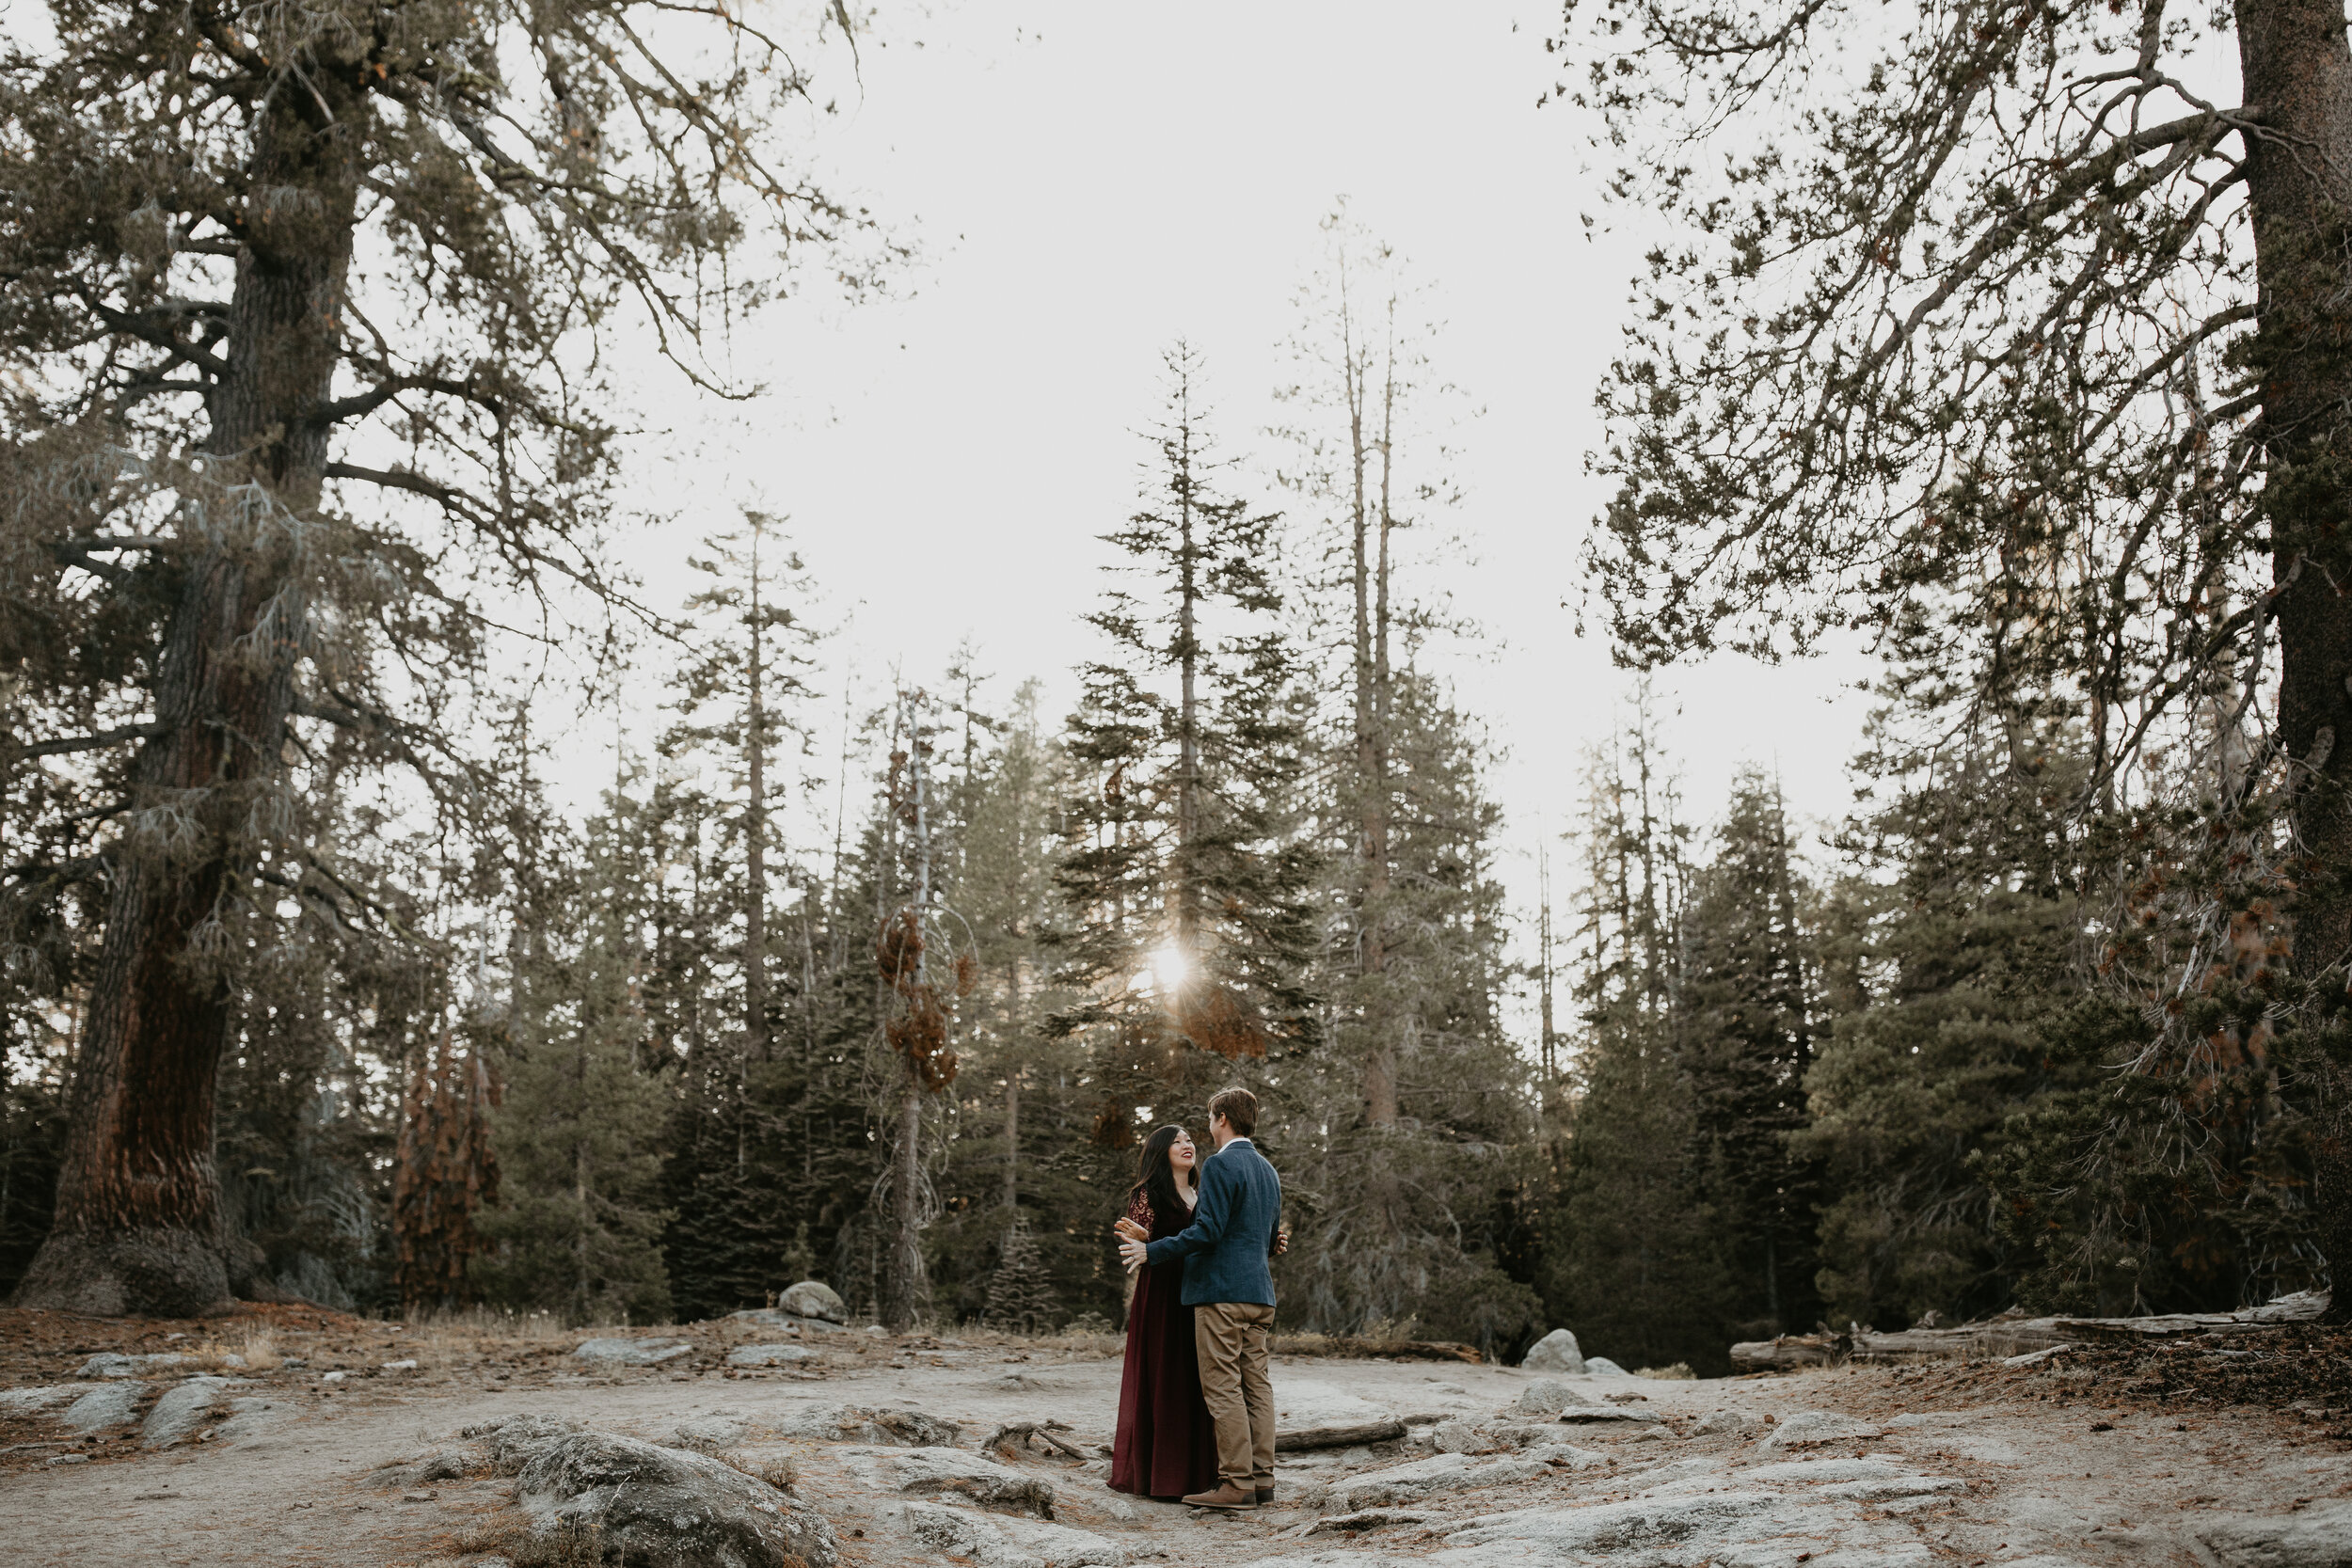 yosemite-national-park-couples-session-at-taft-point-and-yosemite-valley-yosemite-elopement-photographer-nicole-daacke-photography-115.jpg